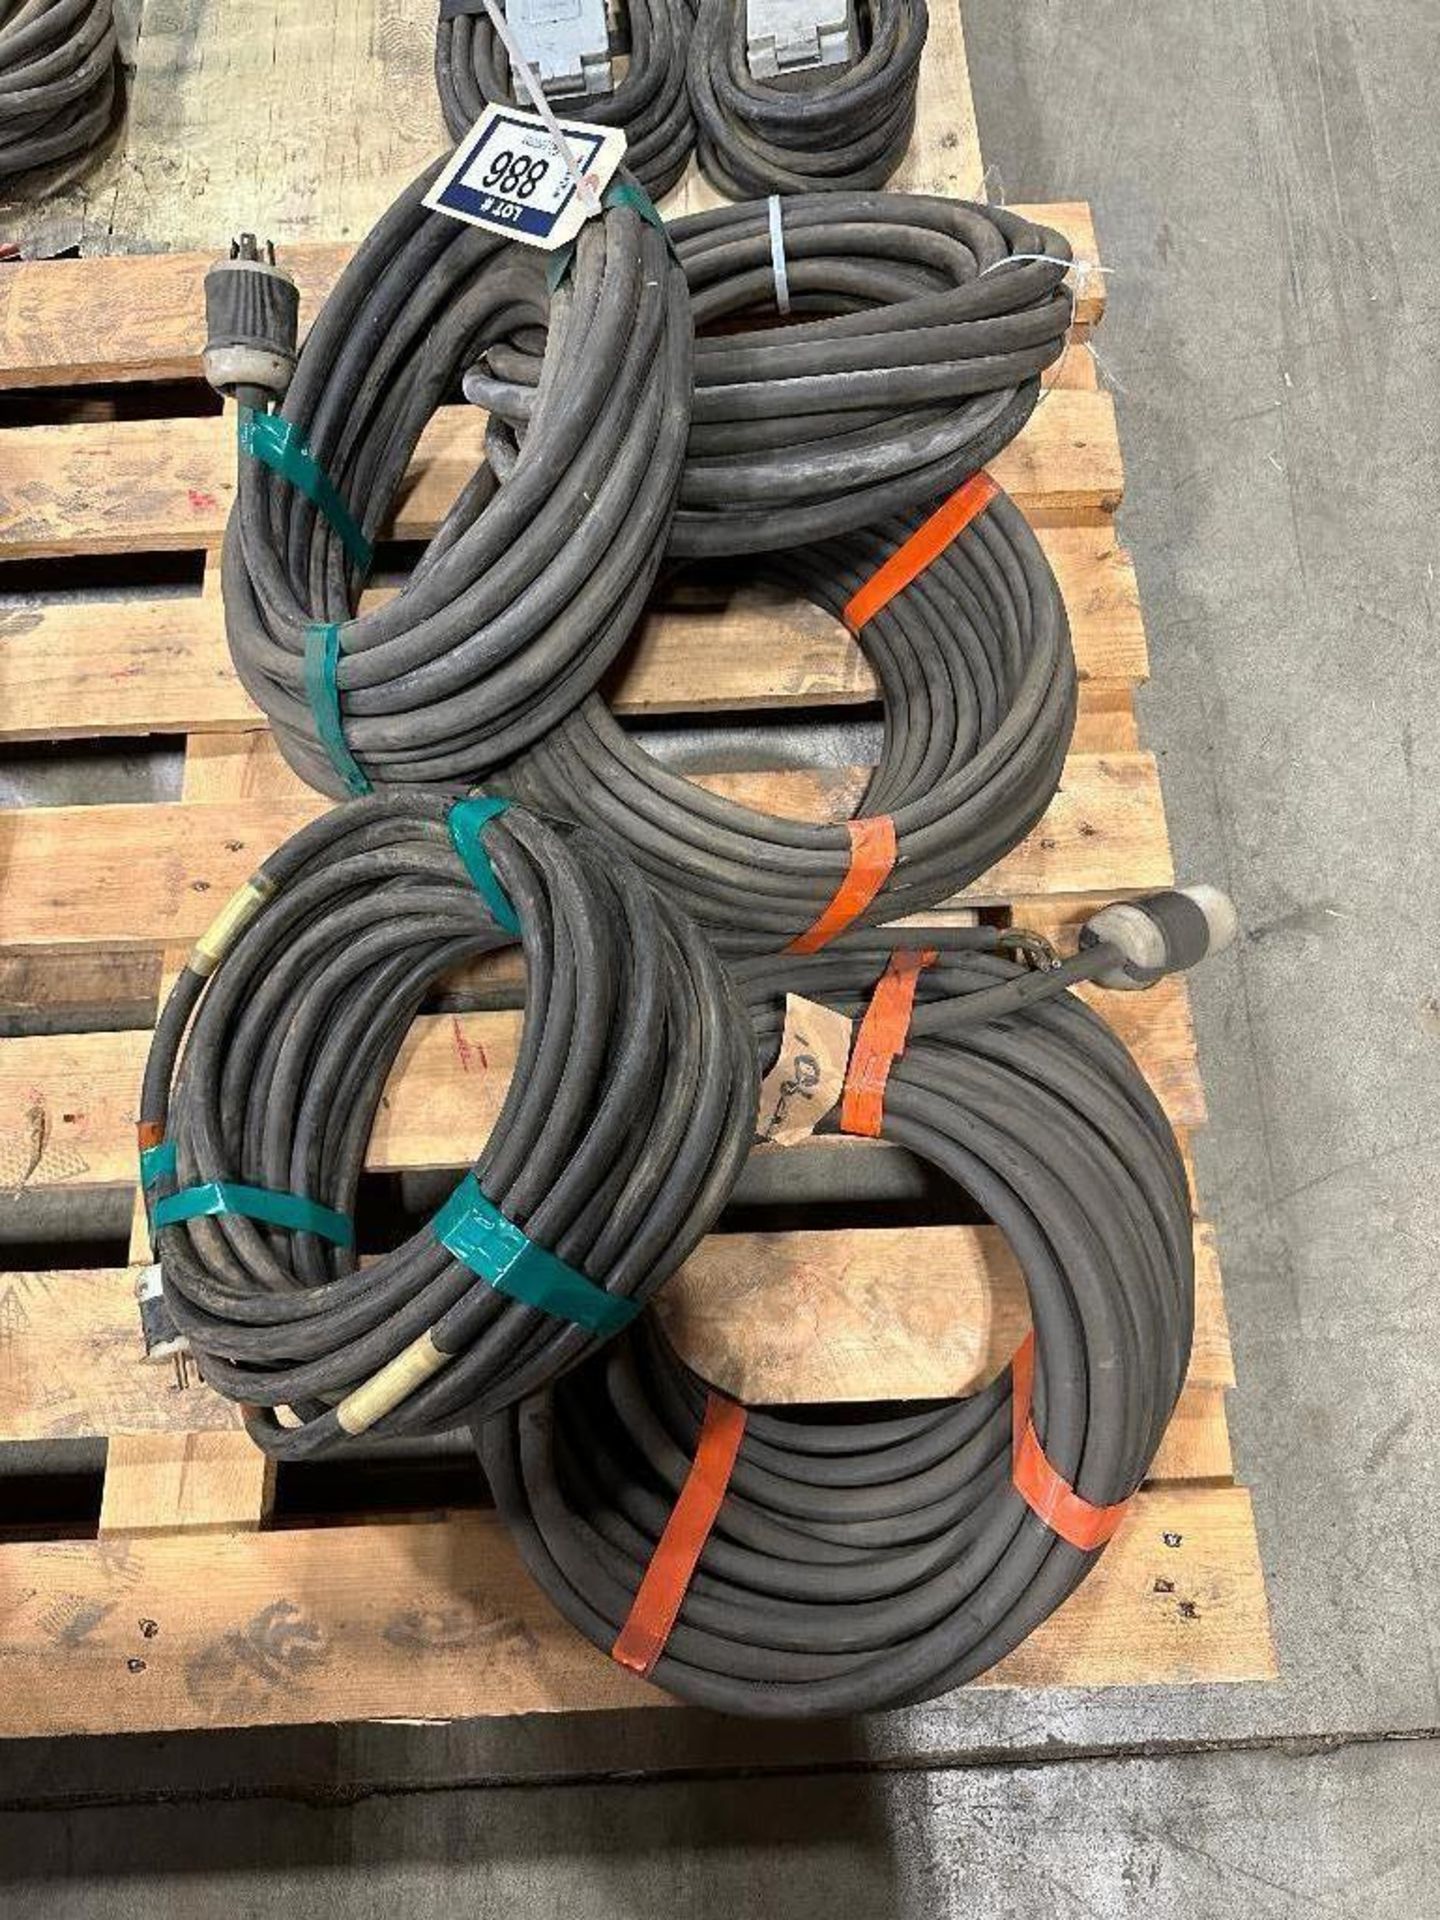 Lot of (5) Asst. Rolls of Asst. Electrical Cable - Image 3 of 3